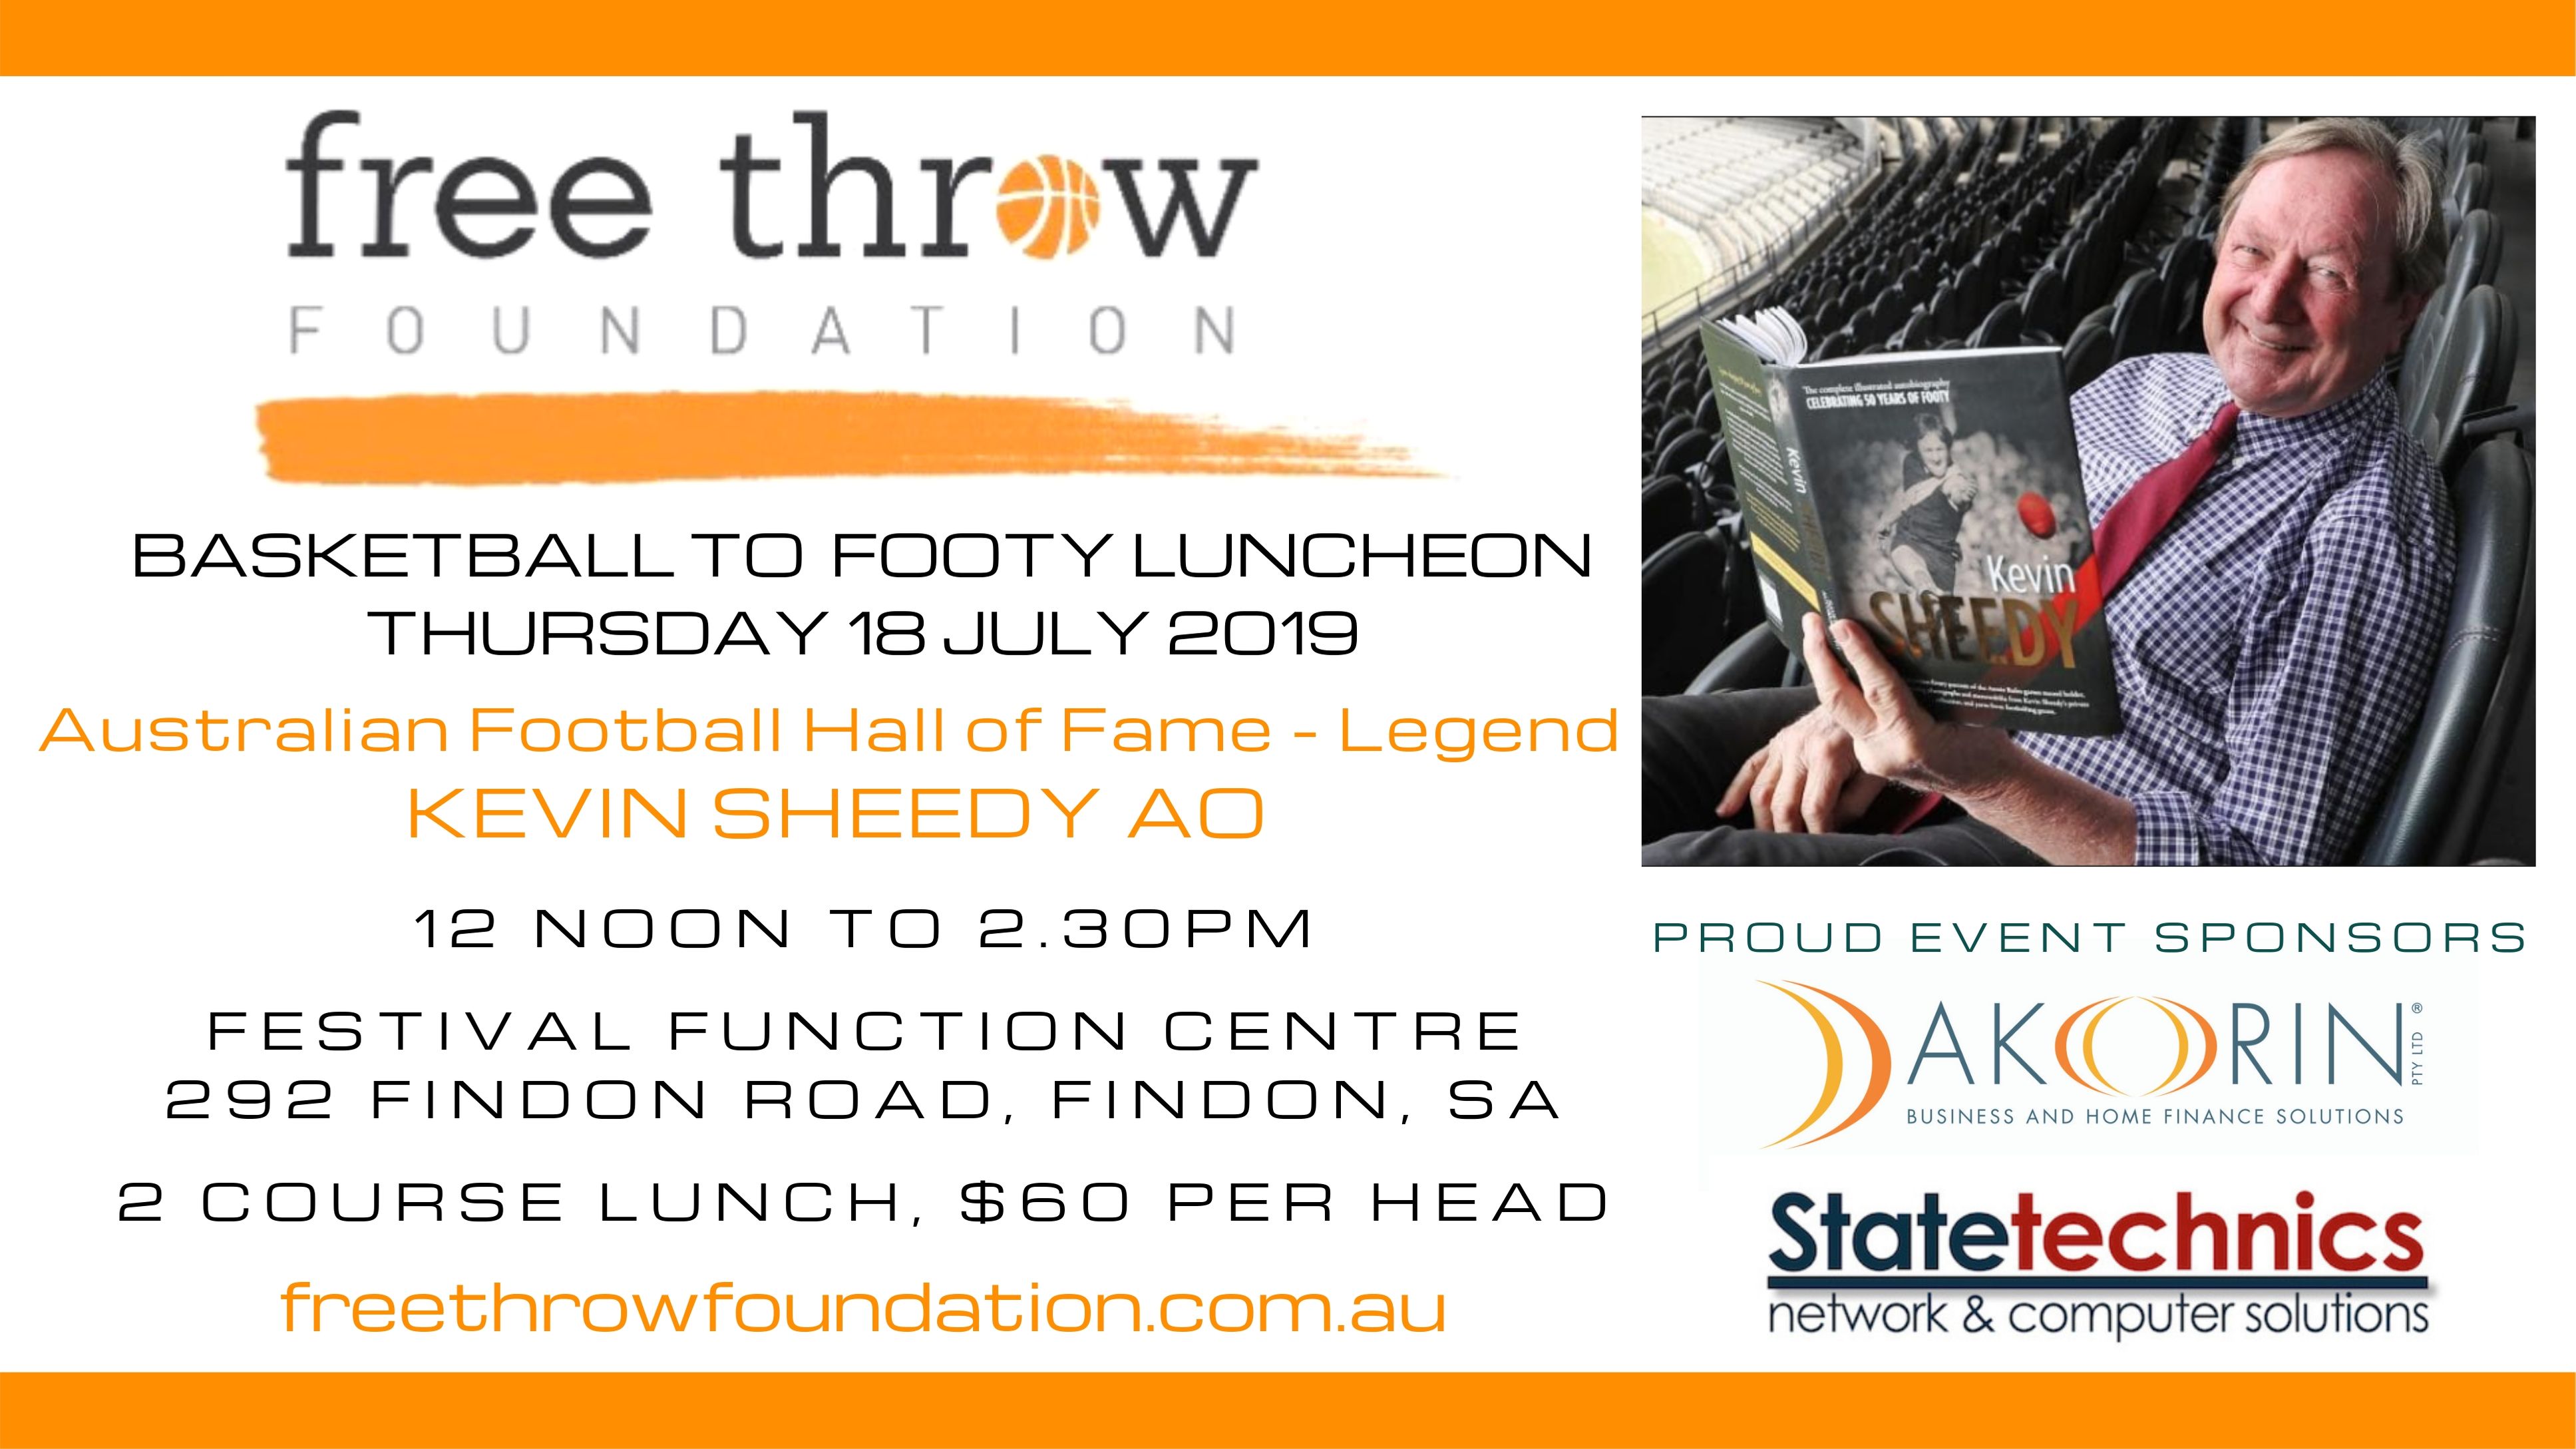 Featured image for “Australian Football Legend, Kevin Sheedy AO to headline Free Throw Foundation’s first Basketball to Footy Luncheon in Adelaide”